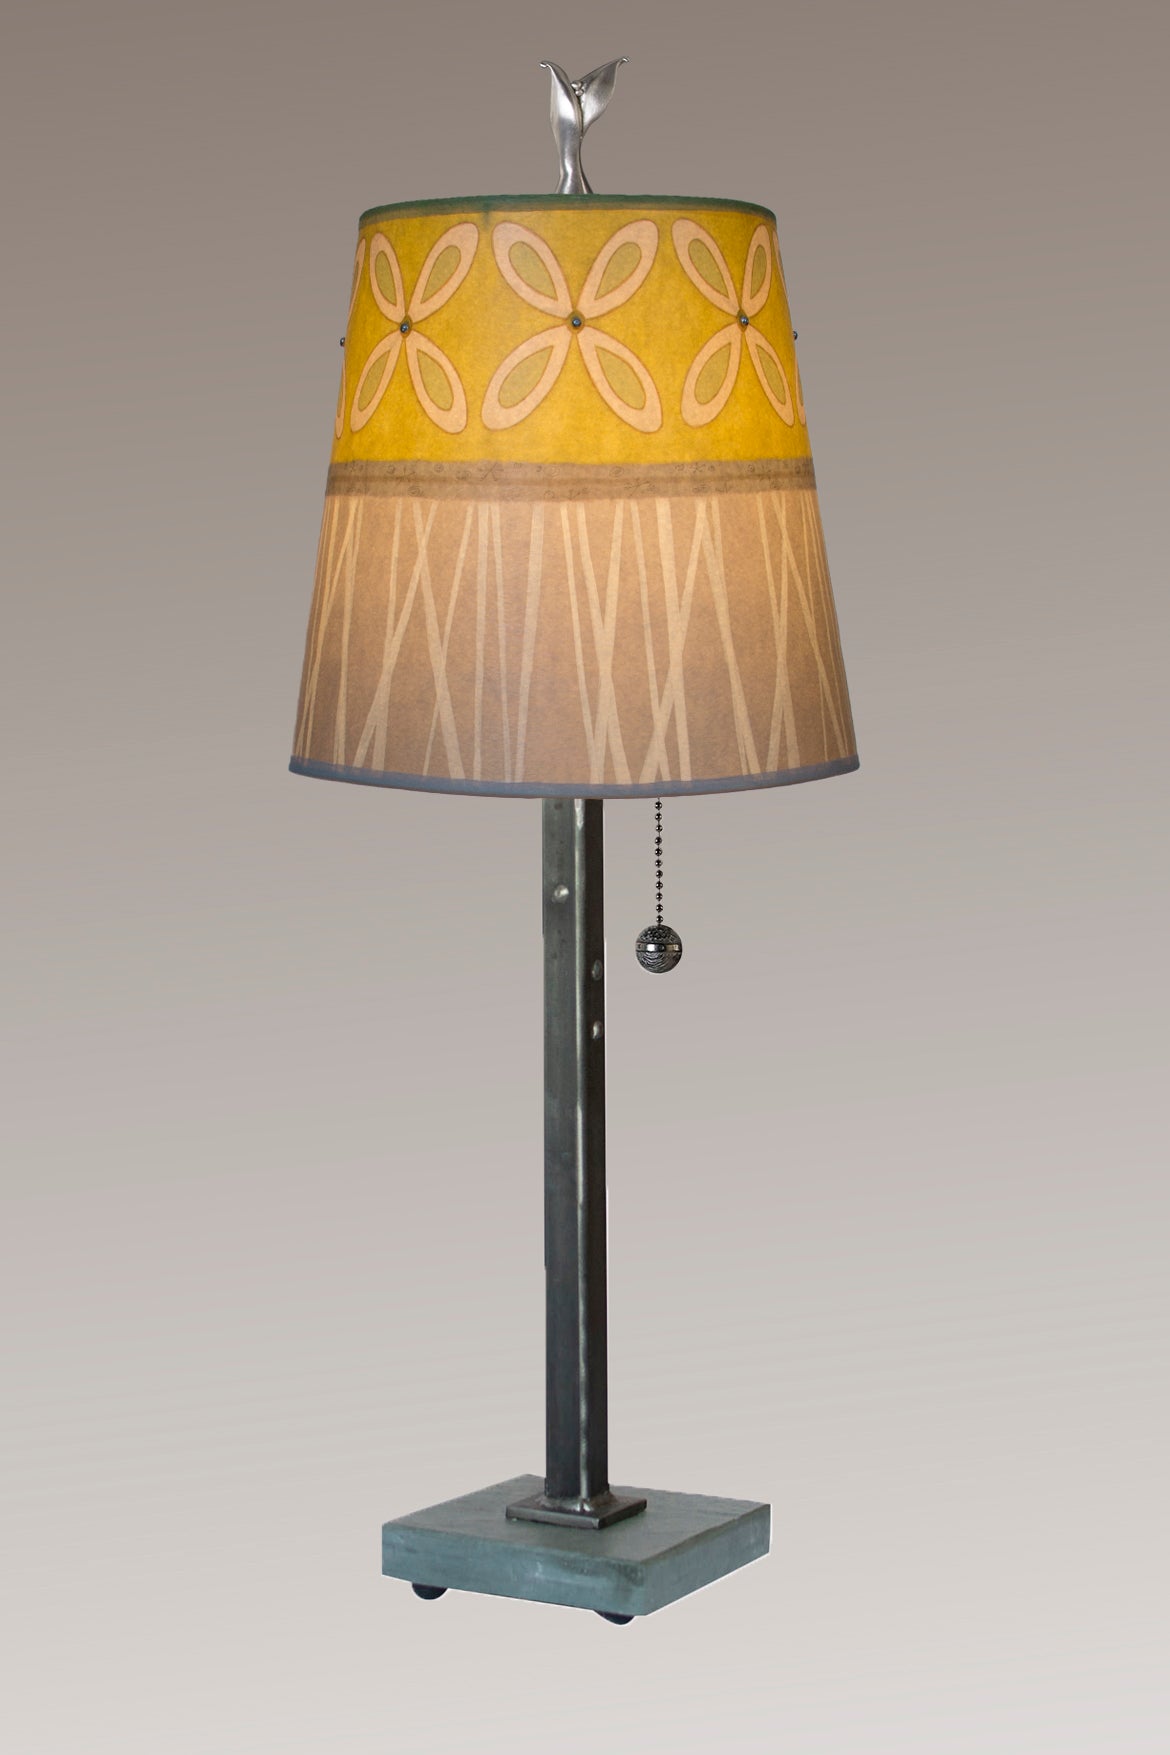 Janna Ugone &amp; Co Table Lamps Steel Table Lamp with Small Drum Shade in Kiwi